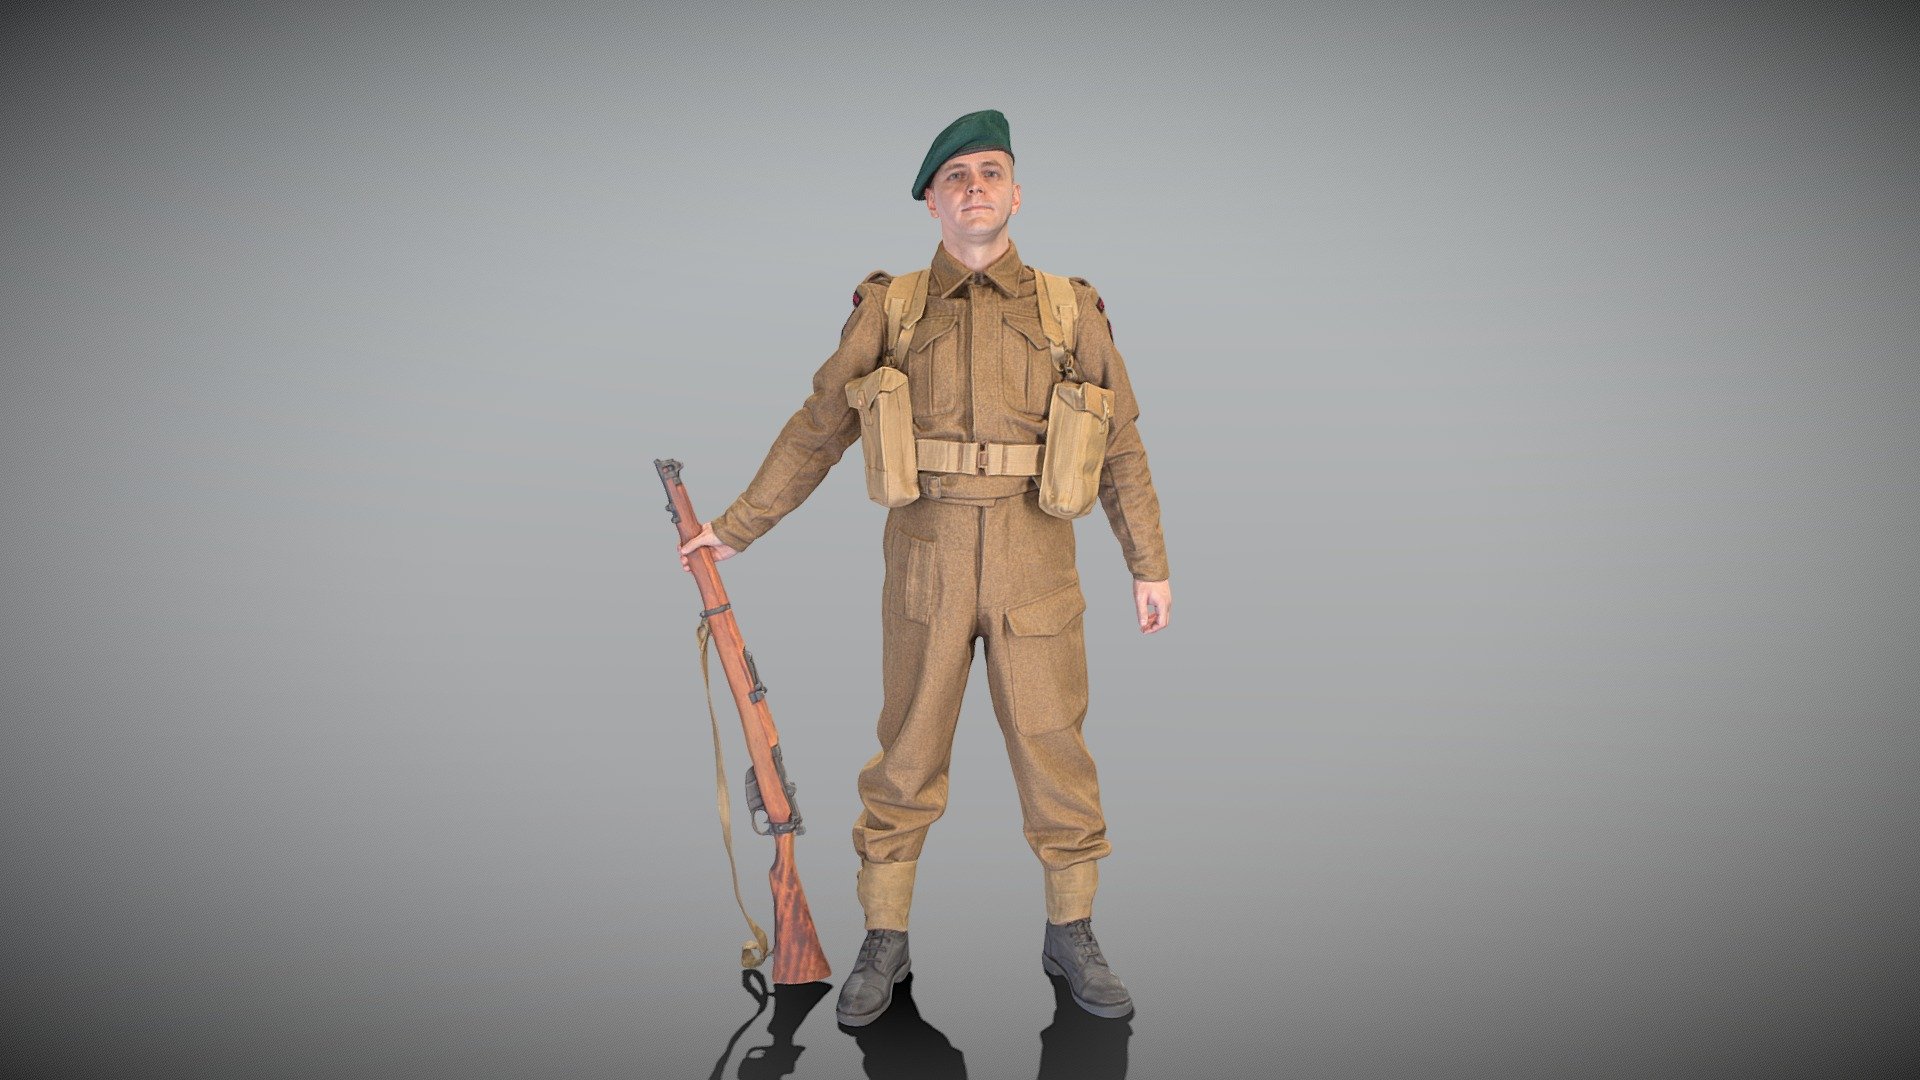 This is a true human size and detailed model of a British infantry character from 1940s. All props and suit are original. The model is captured in casual pose to be perfectly matching to variety of architectural visualization, background character, World War 2 reconstruction, performance, VR/AR content, etc.

Technical specifications:




digital double 3d scan model

150k &amp; 30k triangles | double triangulated

high-poly model (.ztl tool with 5 subdivisions) clean and retopologized automatically via ZRemesher

sufficiently clean

PBR textures 8K resolution: Diffuse, Normal, Specular maps

non-overlapping UV map

no extra plugins are required for this model

Download package includes a Cinema 4D project file with Redshift shader, OBJ, FBX, STL files, which are applicable for 3ds Max, Maya, Unreal Engine, Unity, Blender, etc. All the textures you will find in the “Tex” folder, included into the main archive.

3D EVERYTHING

Stand with Ukraine! - Soldier with gun 397 - Buy Royalty Free 3D model by deep3dstudio 3d model